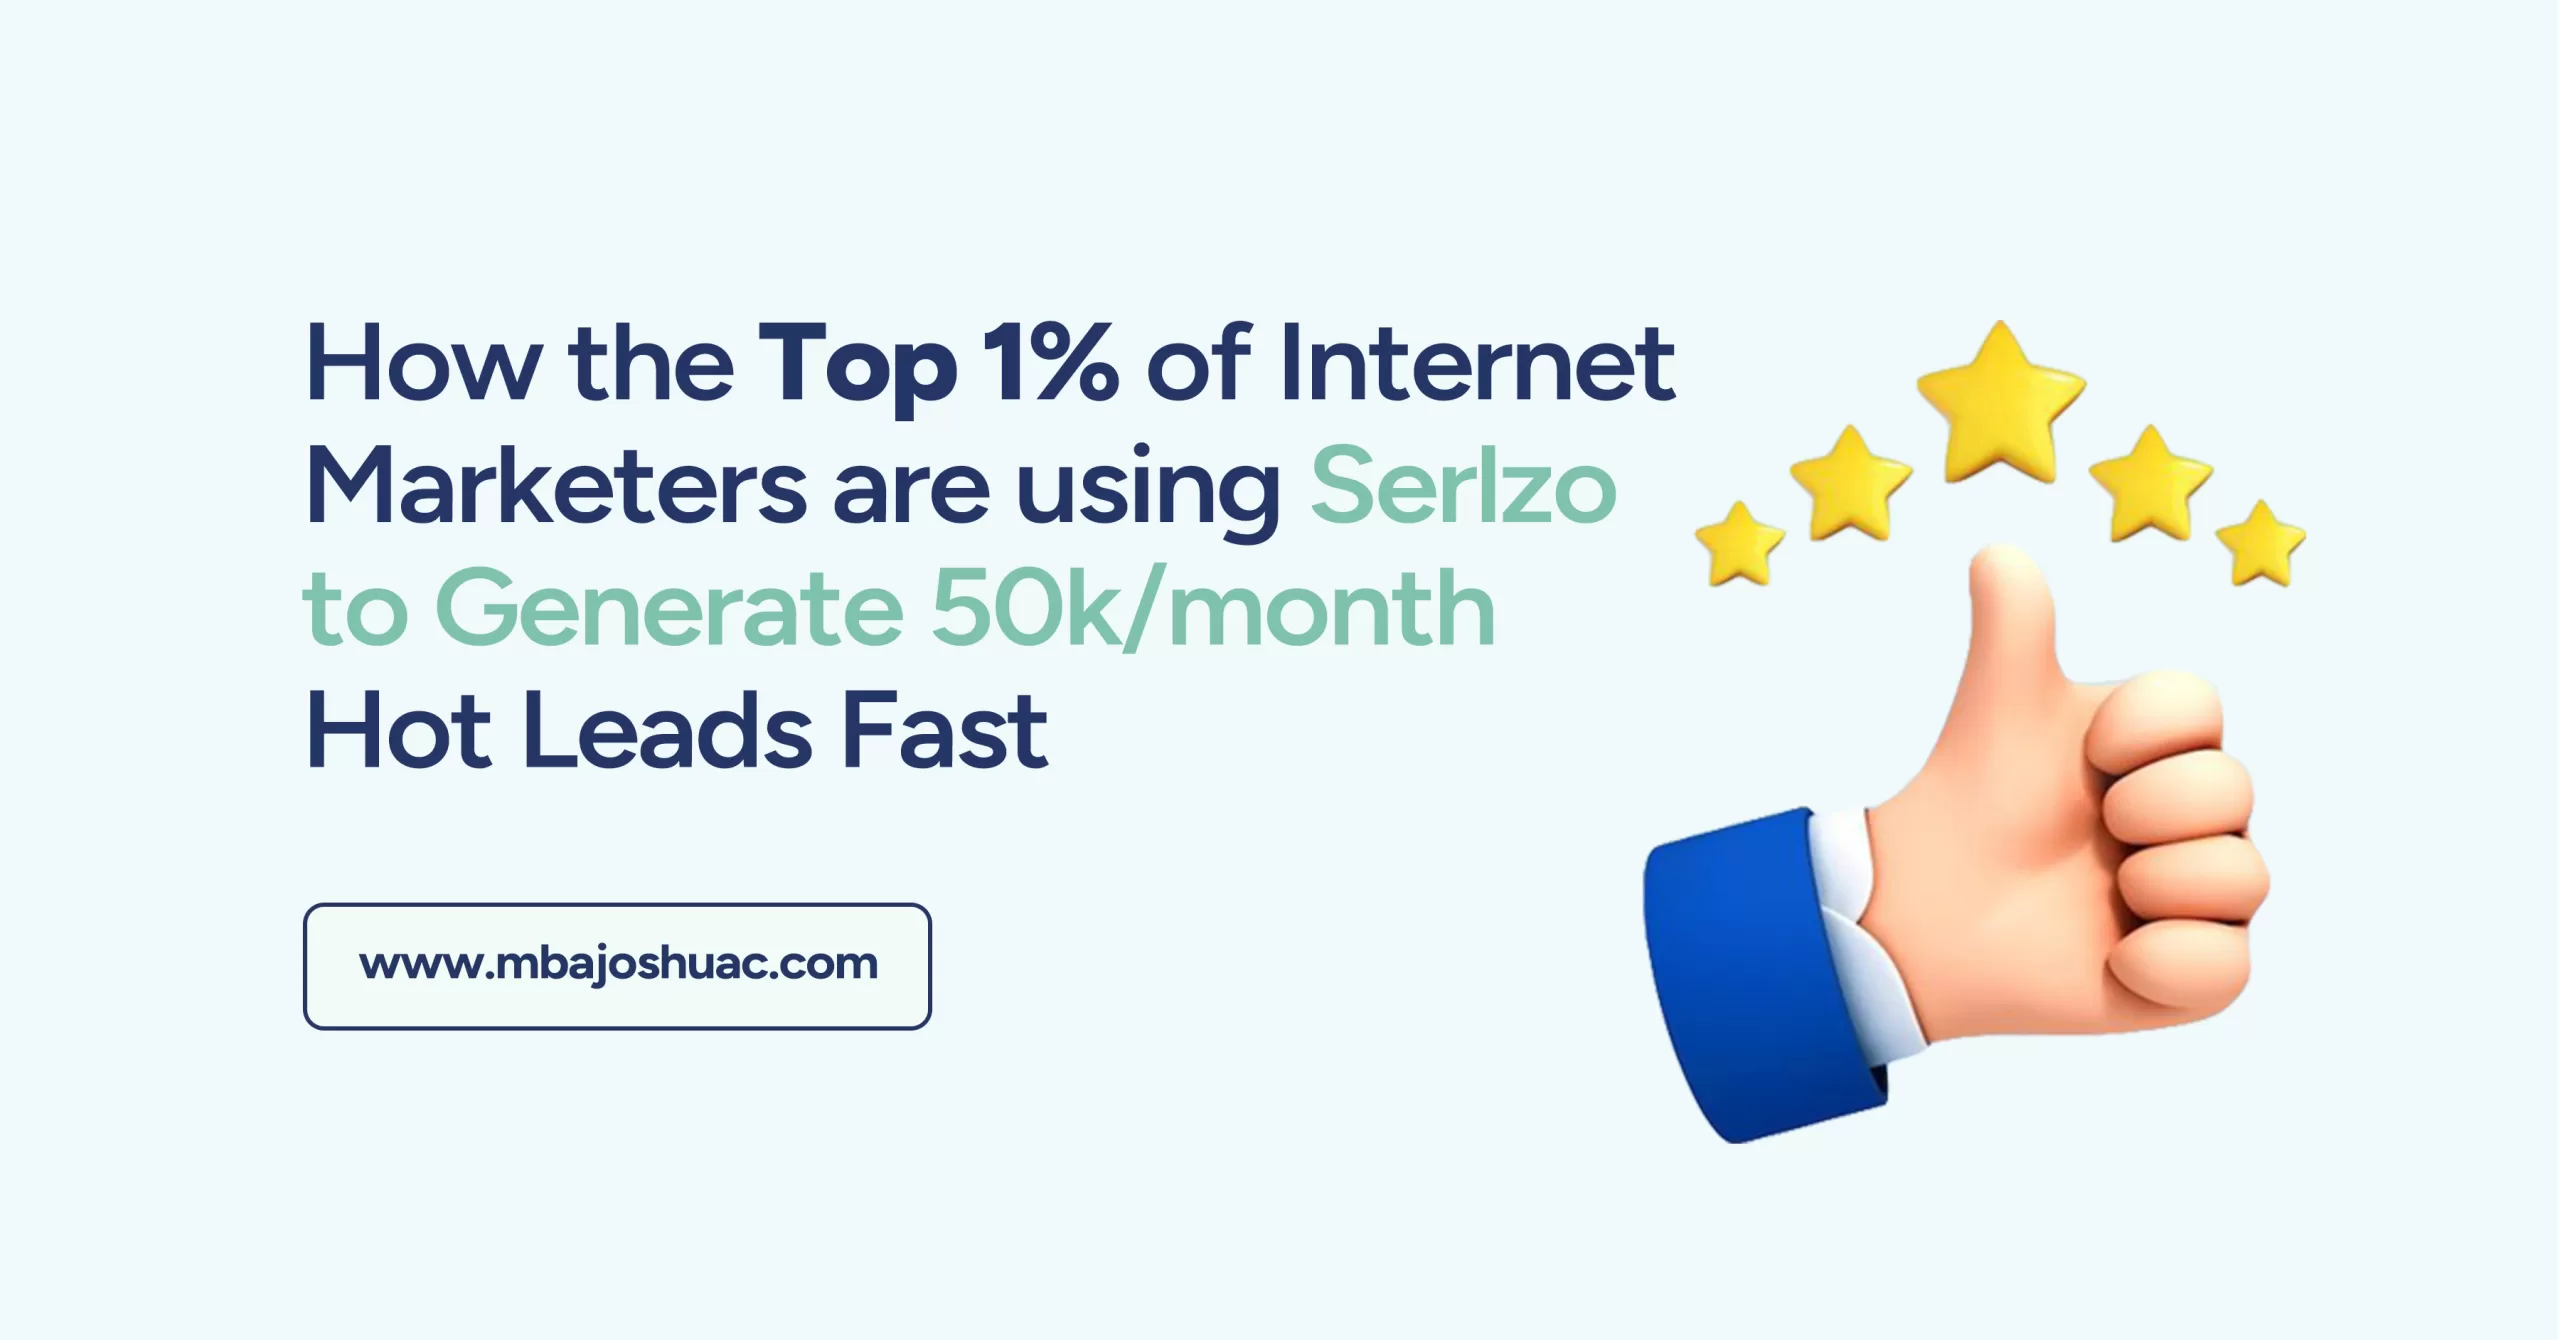 Featured image for the blog post: how the top 1% of internet marketers are using Serlzo to generate leads fast